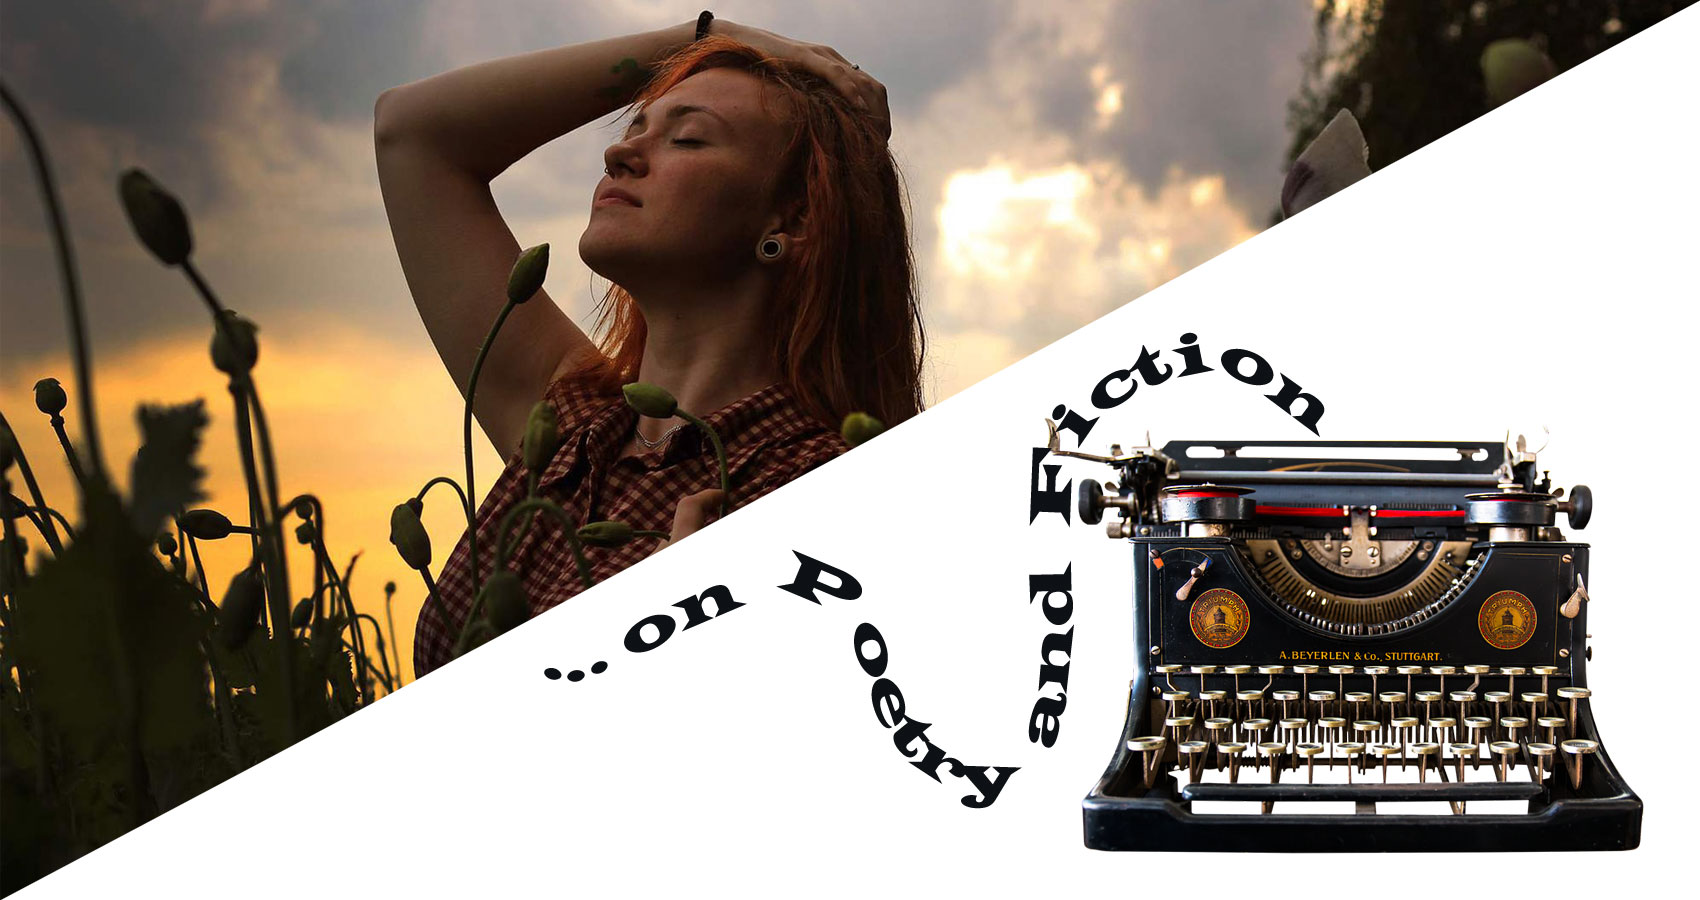 ...on Poetry and Fiction - Just “One Word” Away ("God"), editorial by Phyllis P. Colucci at Spillwords.com